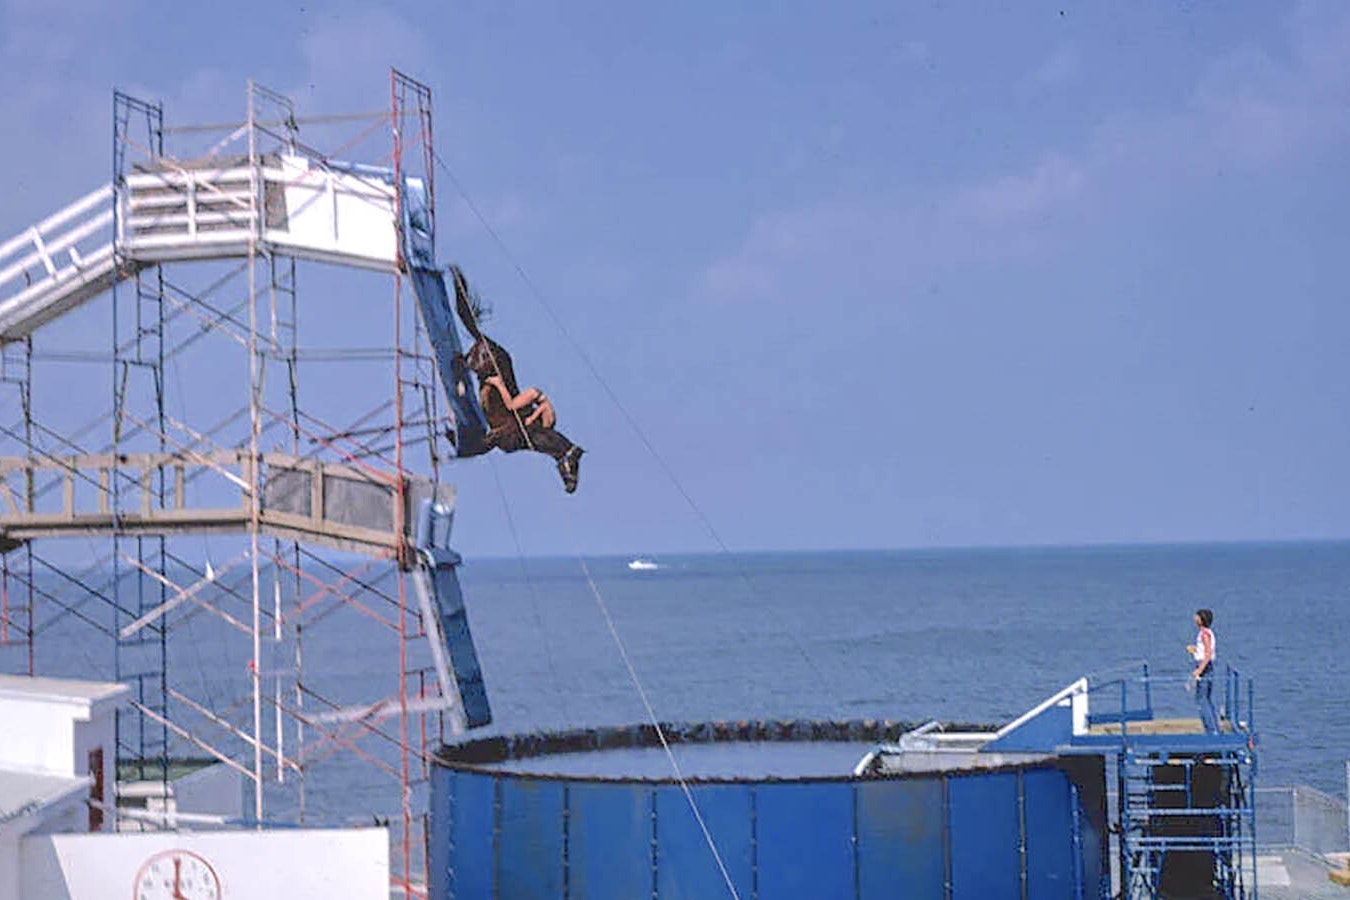 A horse takes a practice dive at Atlantic City's Steel Pier Park in 1978.